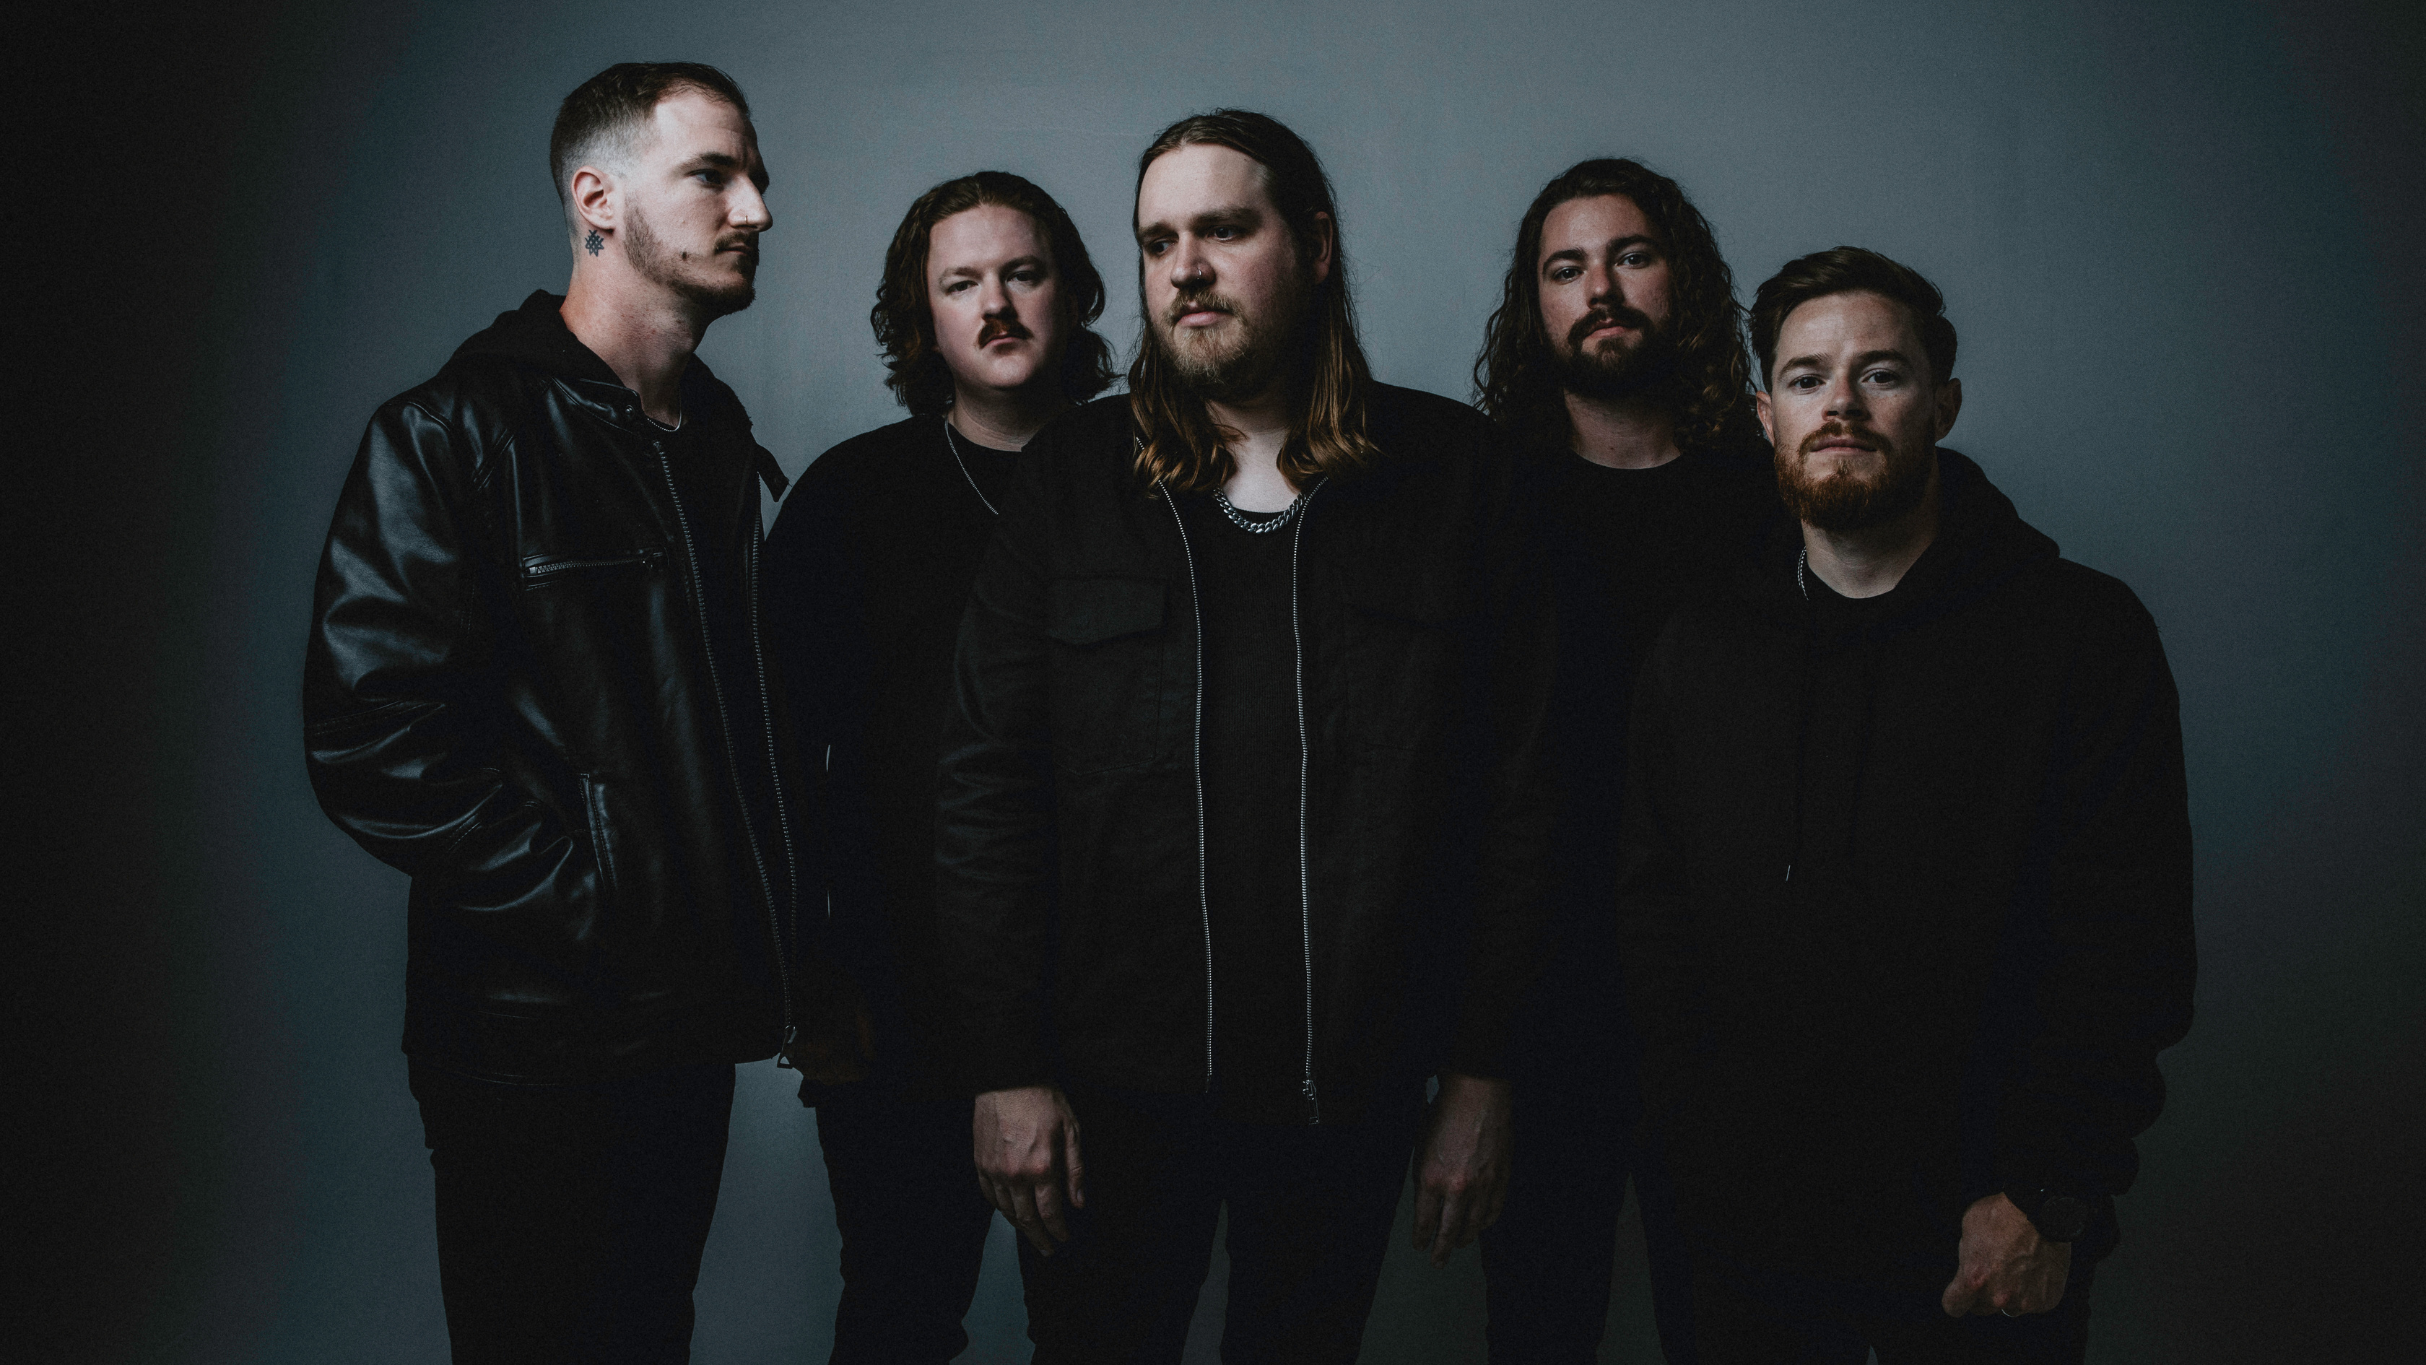 Wage War - The Manic Tour free presale password for early tickets in Saskatoon